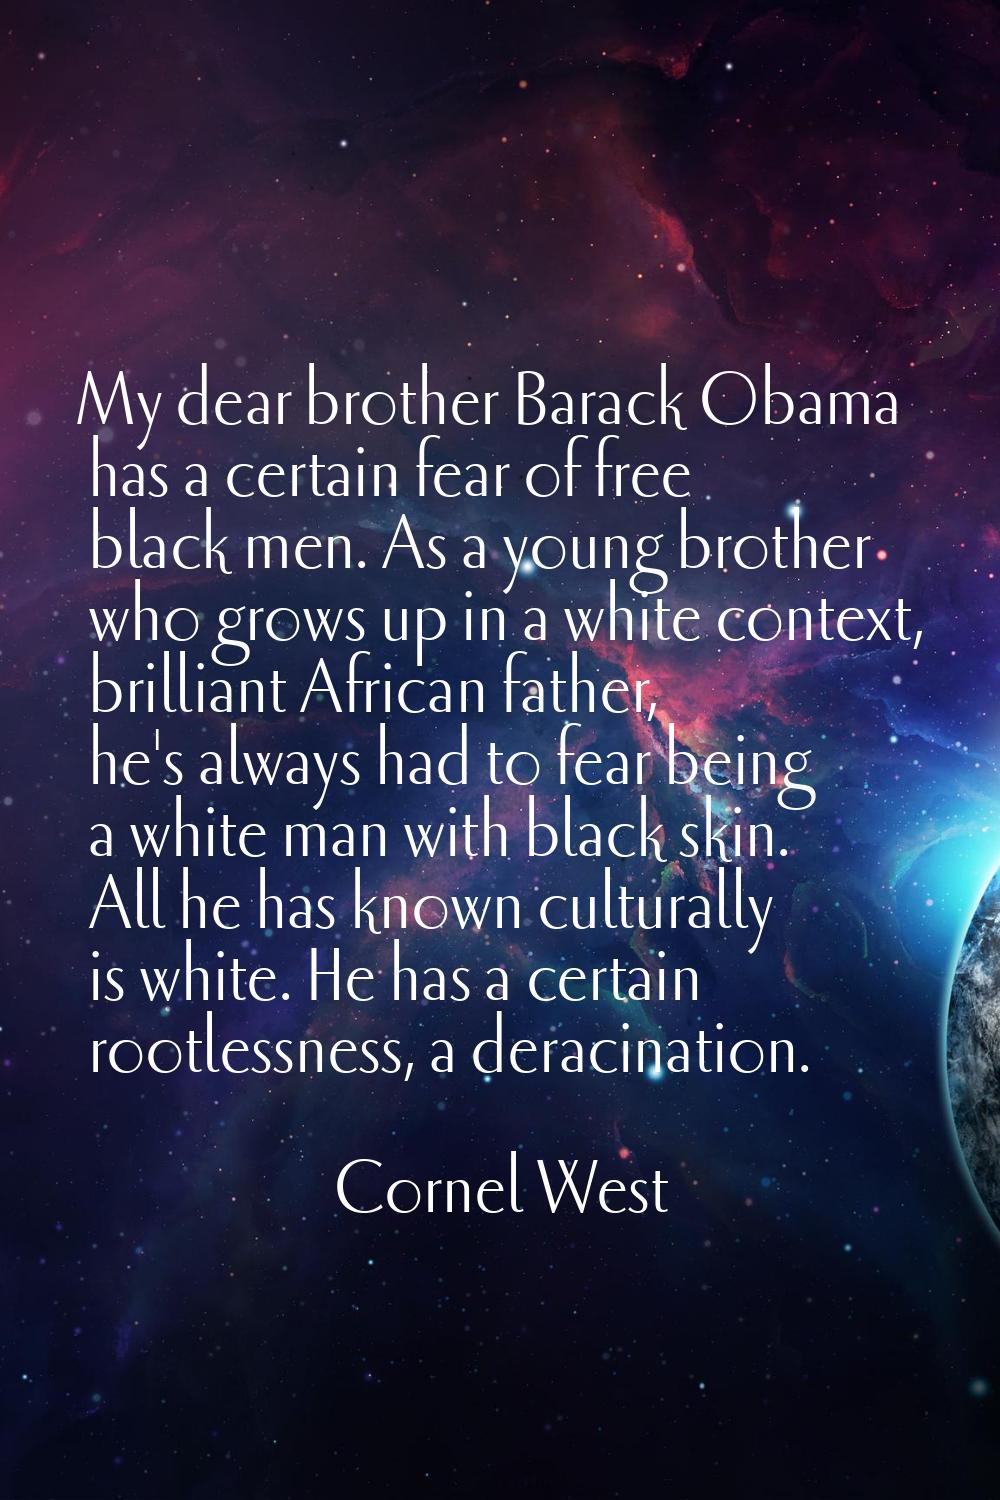 My dear brother Barack Obama has a certain fear of free black men. As a young brother who grows up 